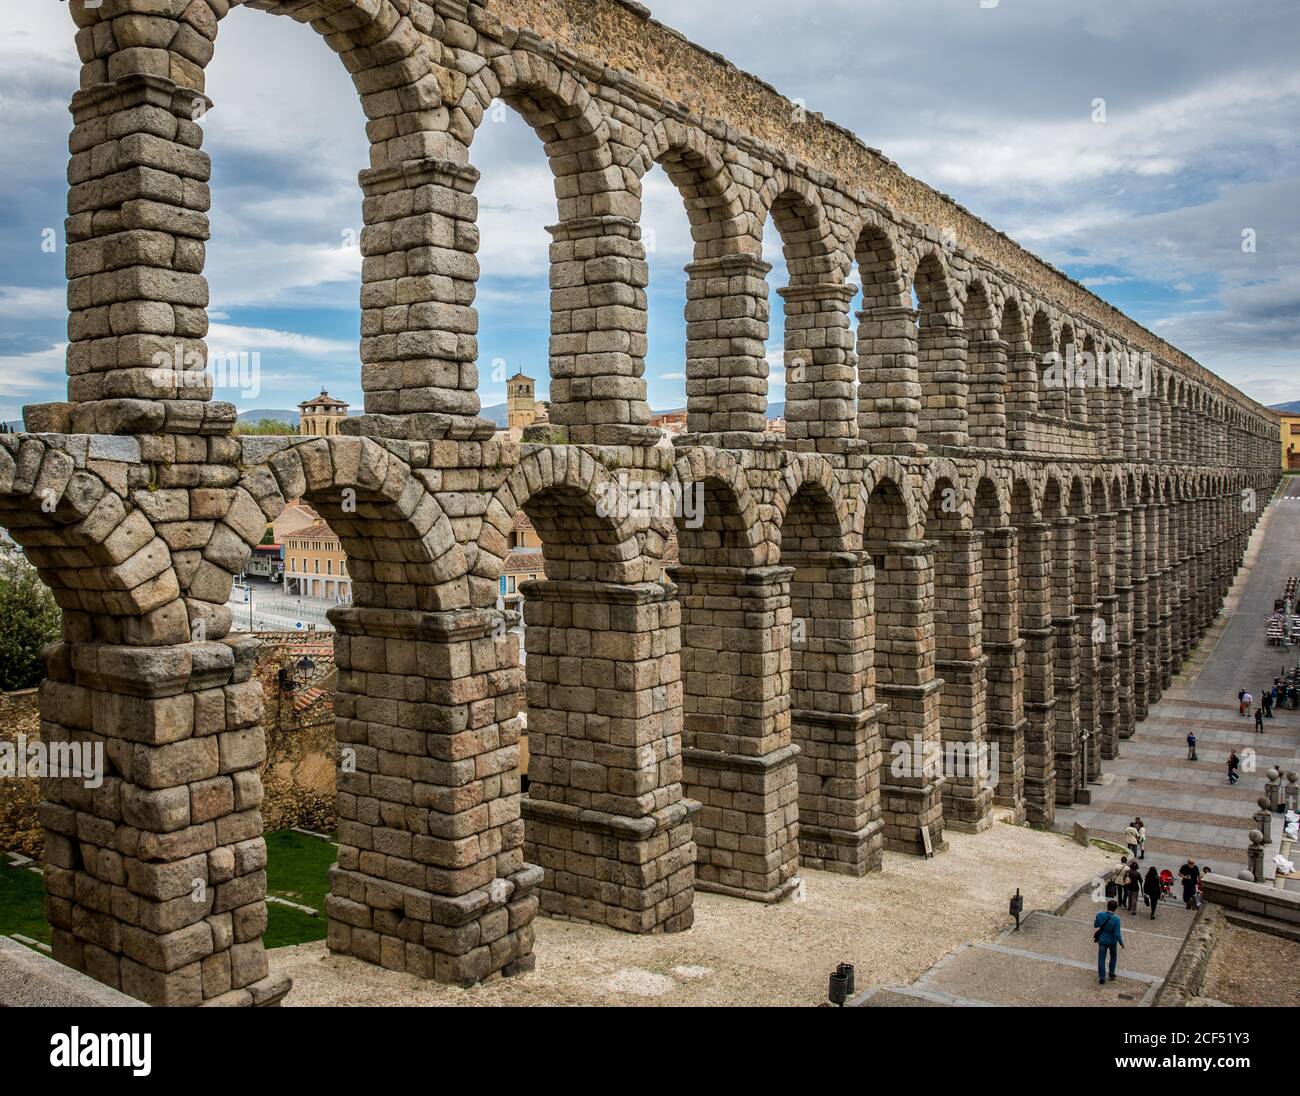 The Roman Aqueduct of Segovia, Spain dating from the late 1st or early 2nd century CE. Stock Photo